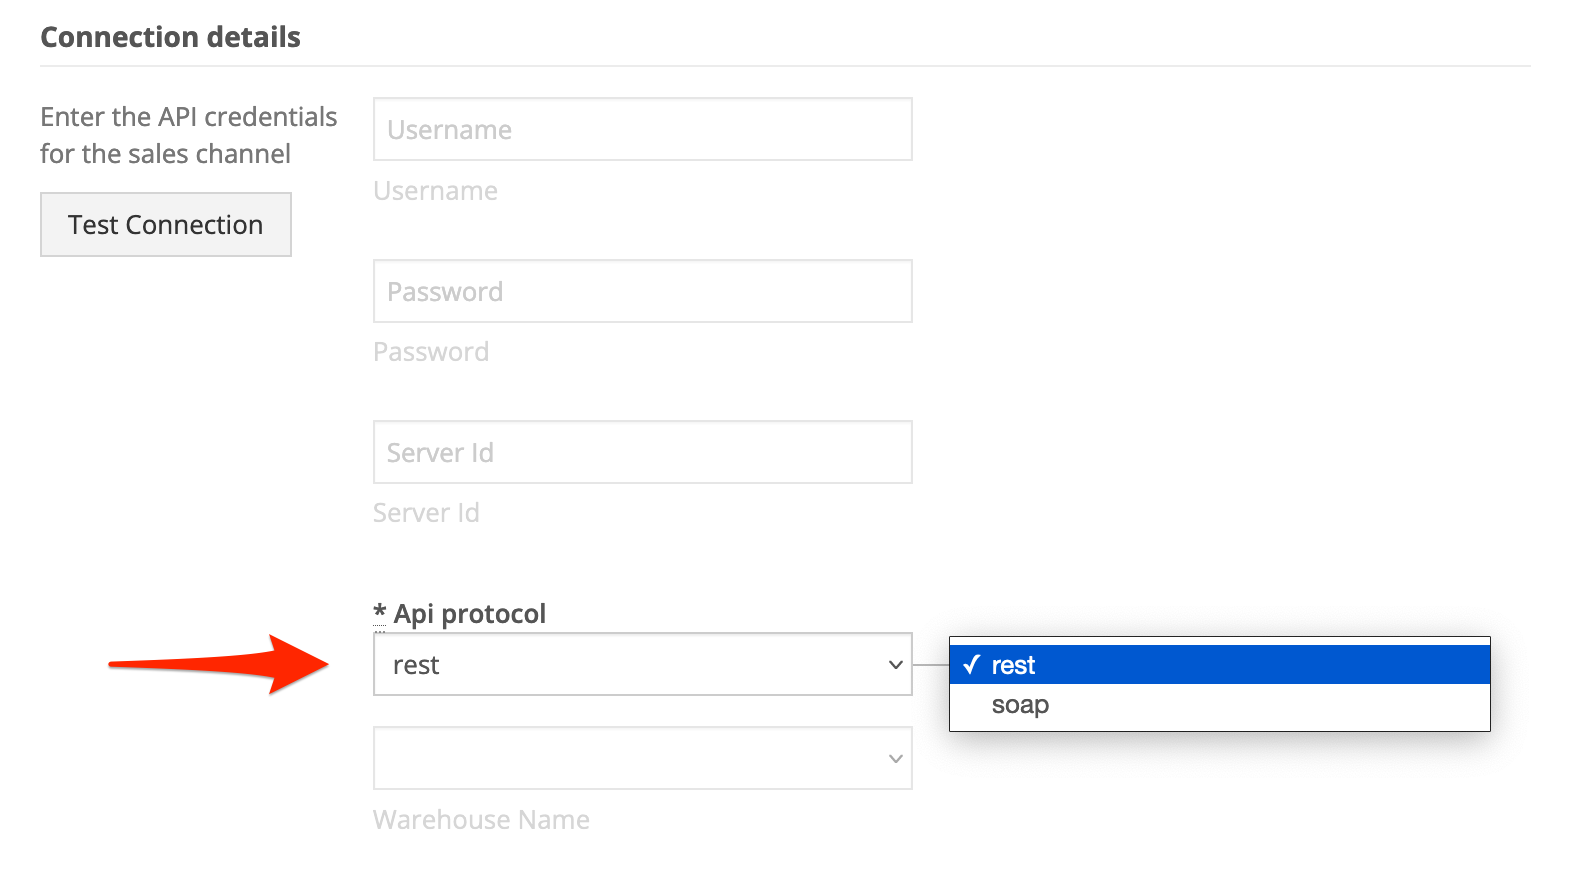 In Sellercloud REST connection details, specify REST as the API protocol.